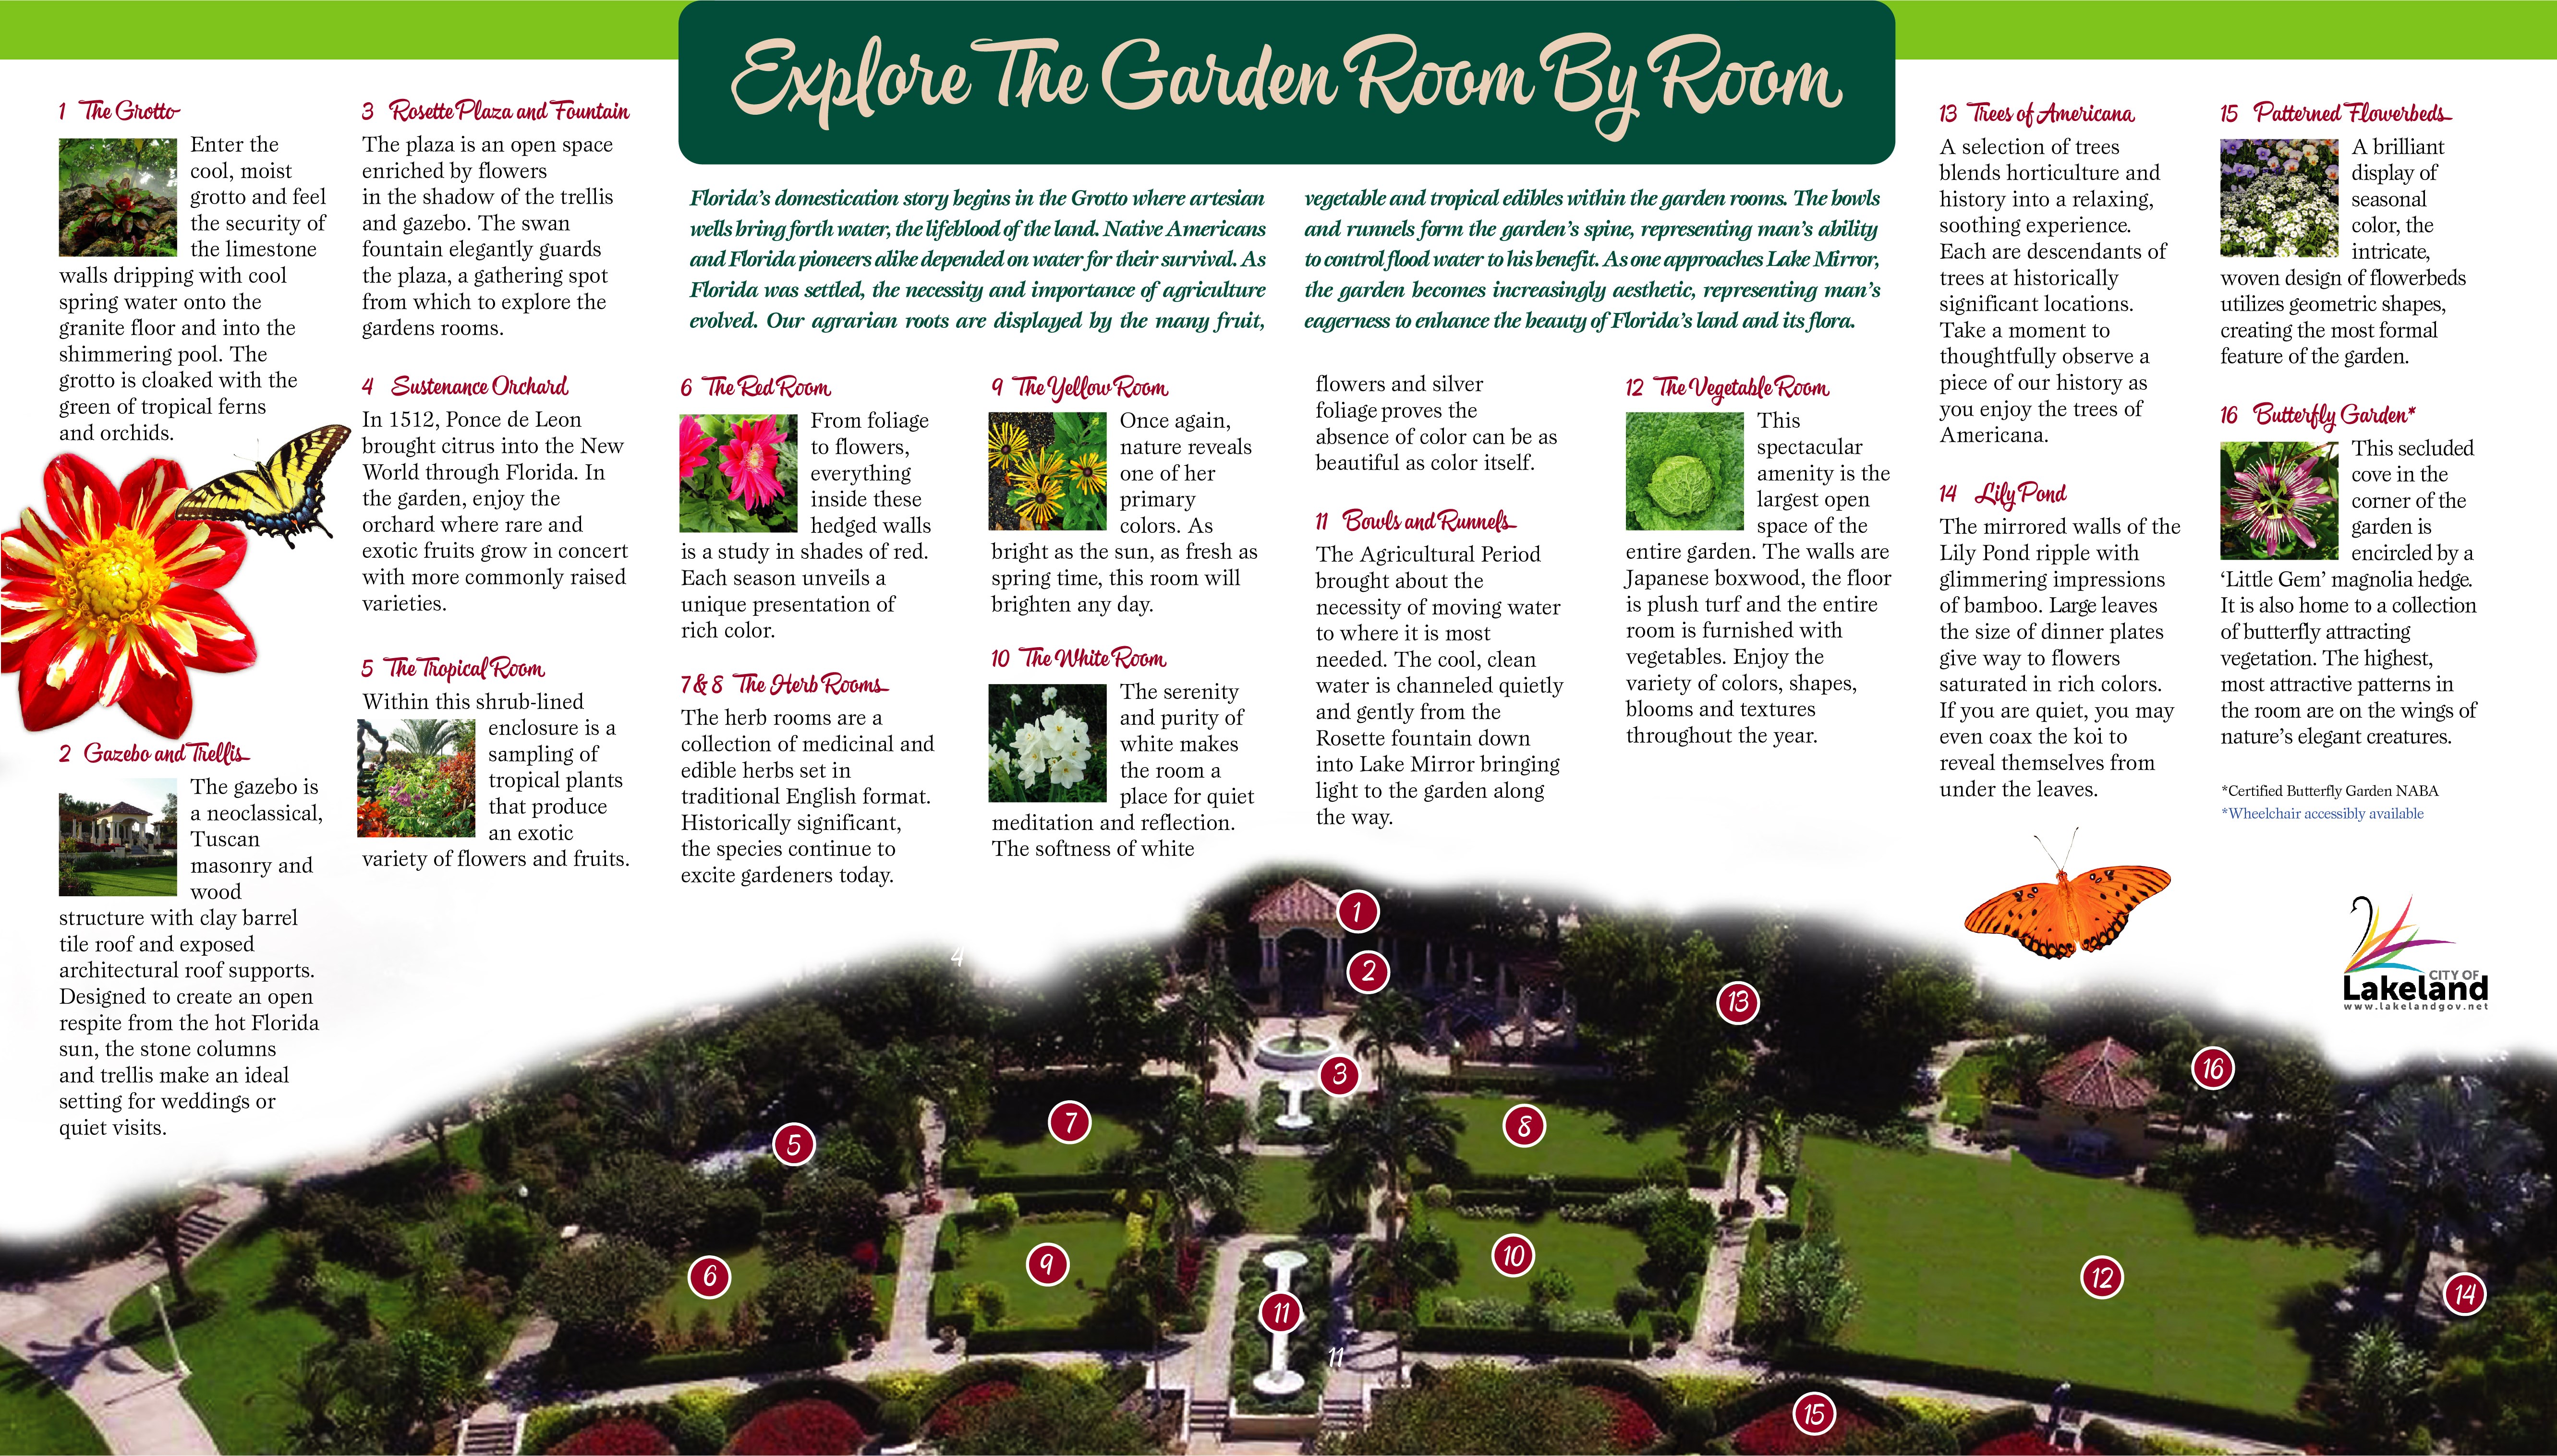 Hollis Garden Brochure with images and info/map of Hollis Garden - Info on page